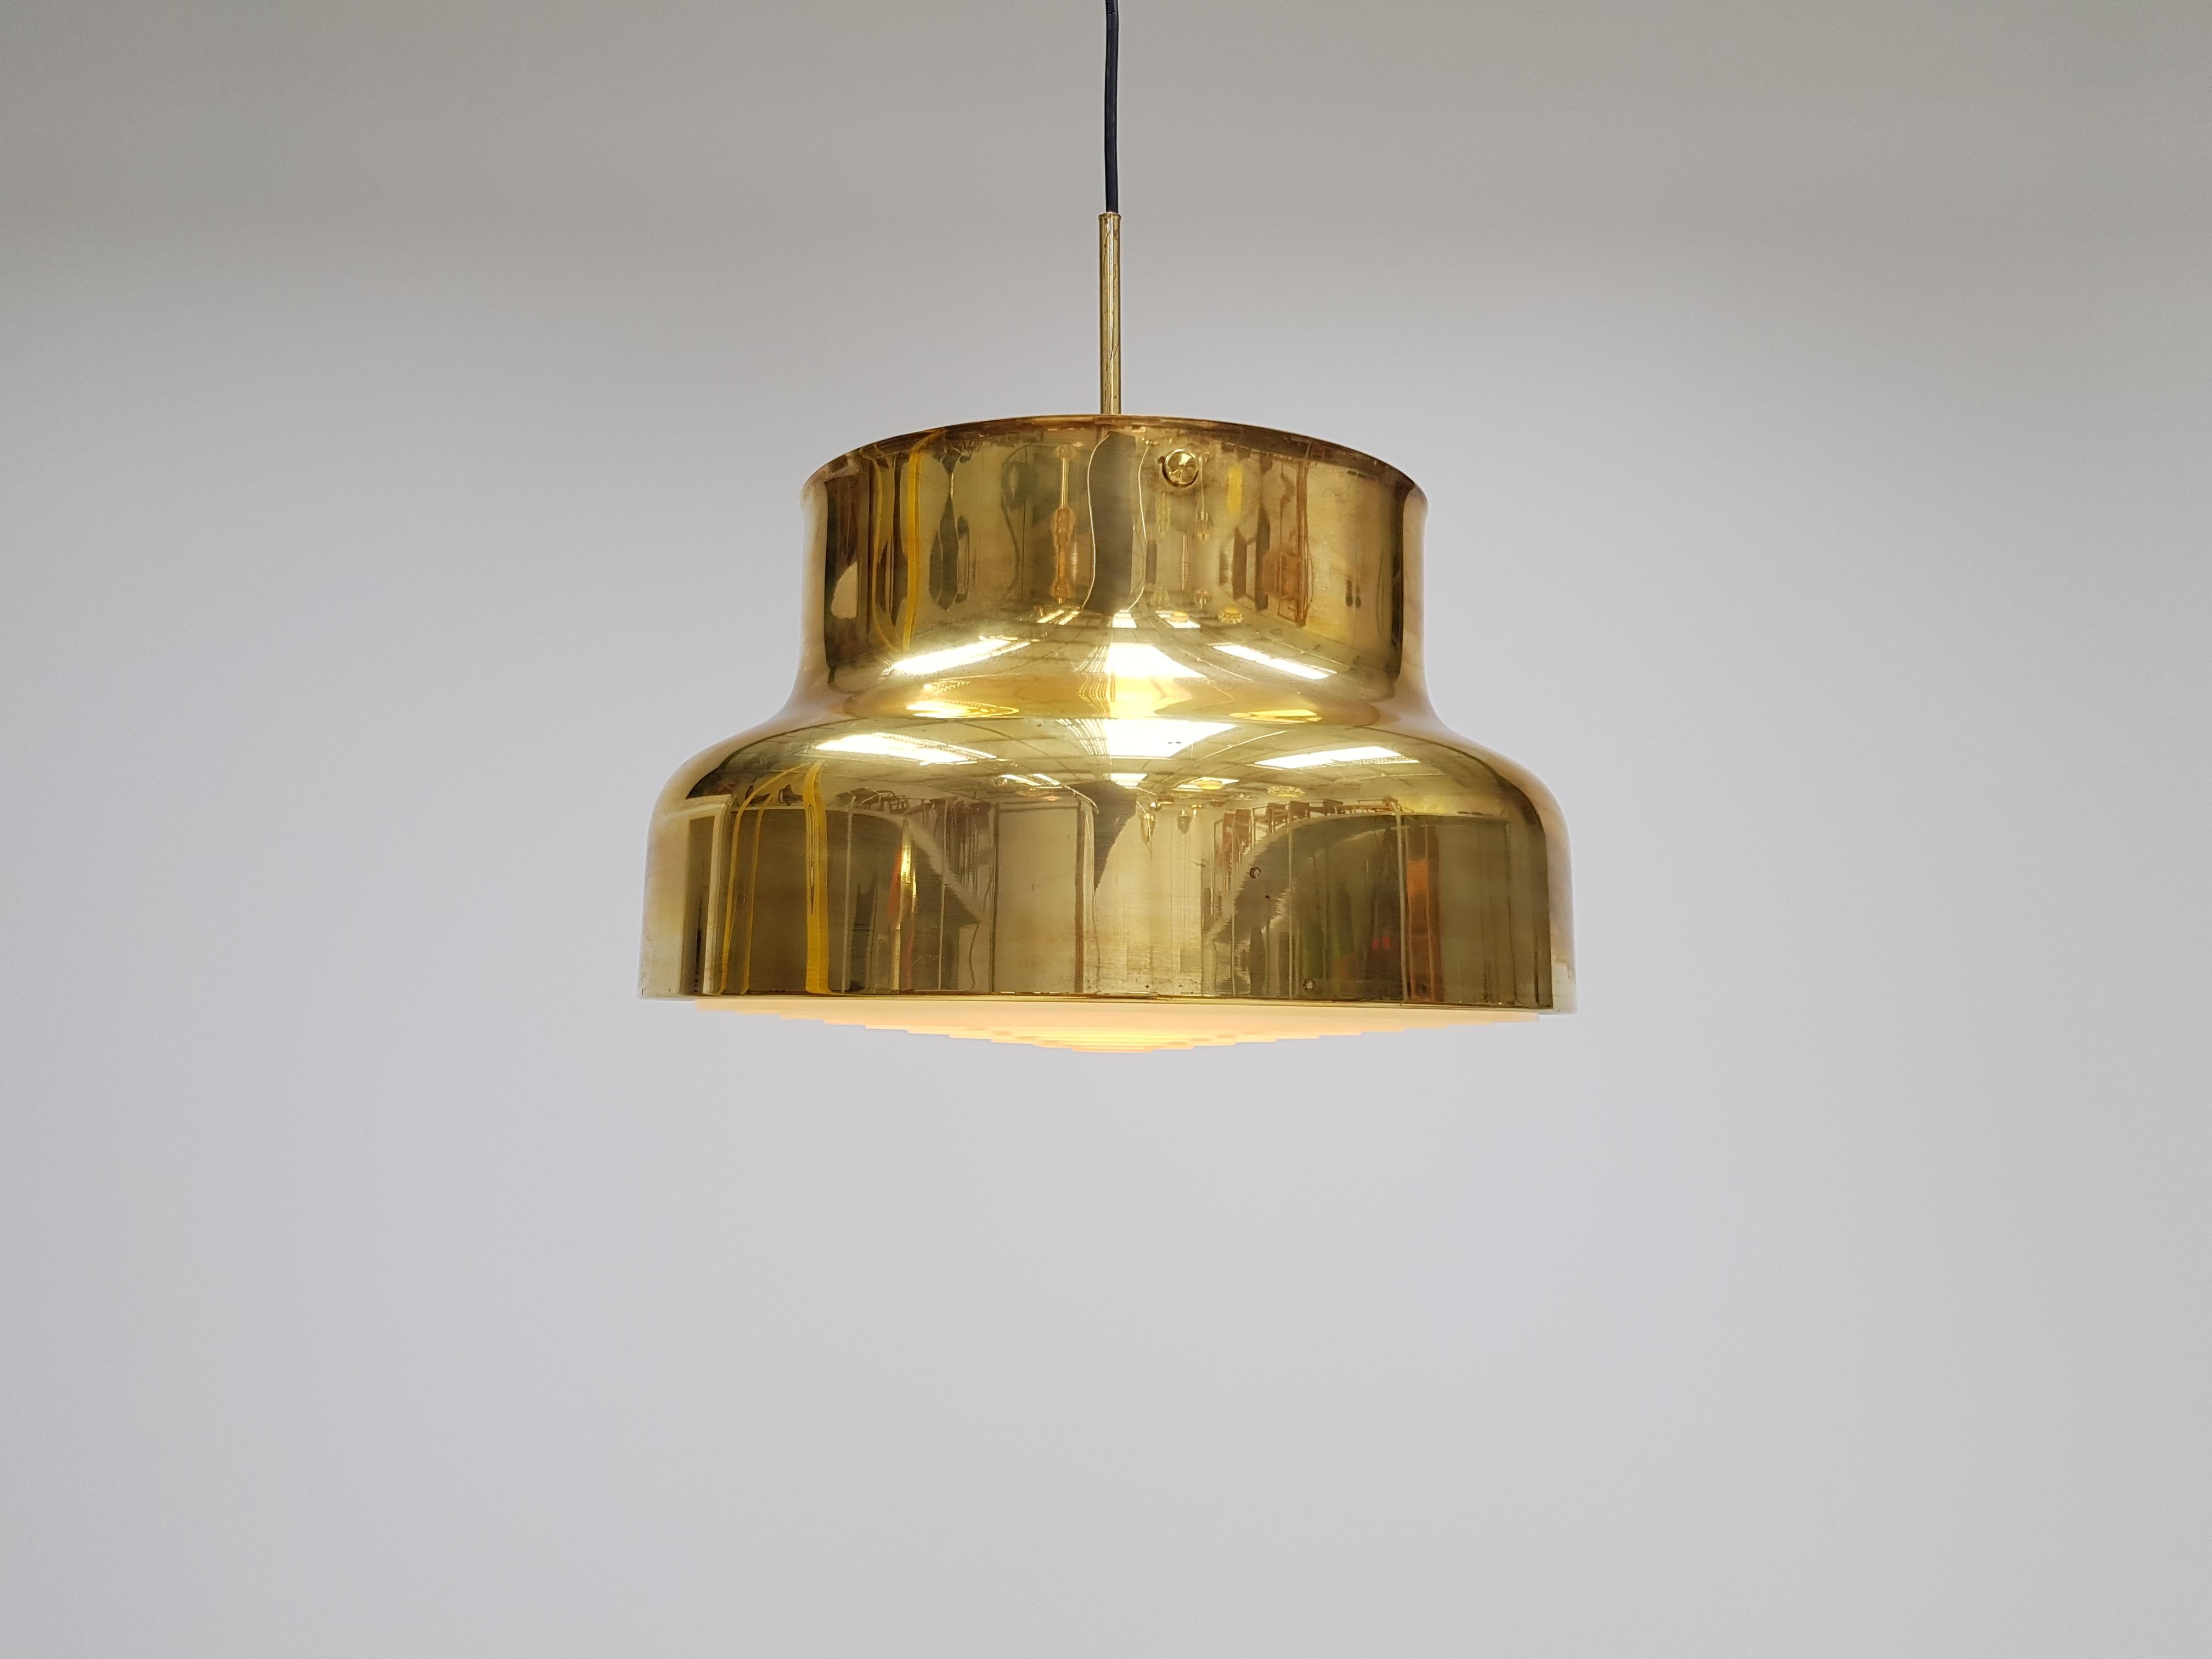 Brass ceiling pendant Bumling by Anders Pehrson for Atelije Lyktan, Sweden, 1970s. 

Anders Pehrson took over the company in 1964. He would come to put his personal stamp on development in the company until the end of the 1970s. He was a